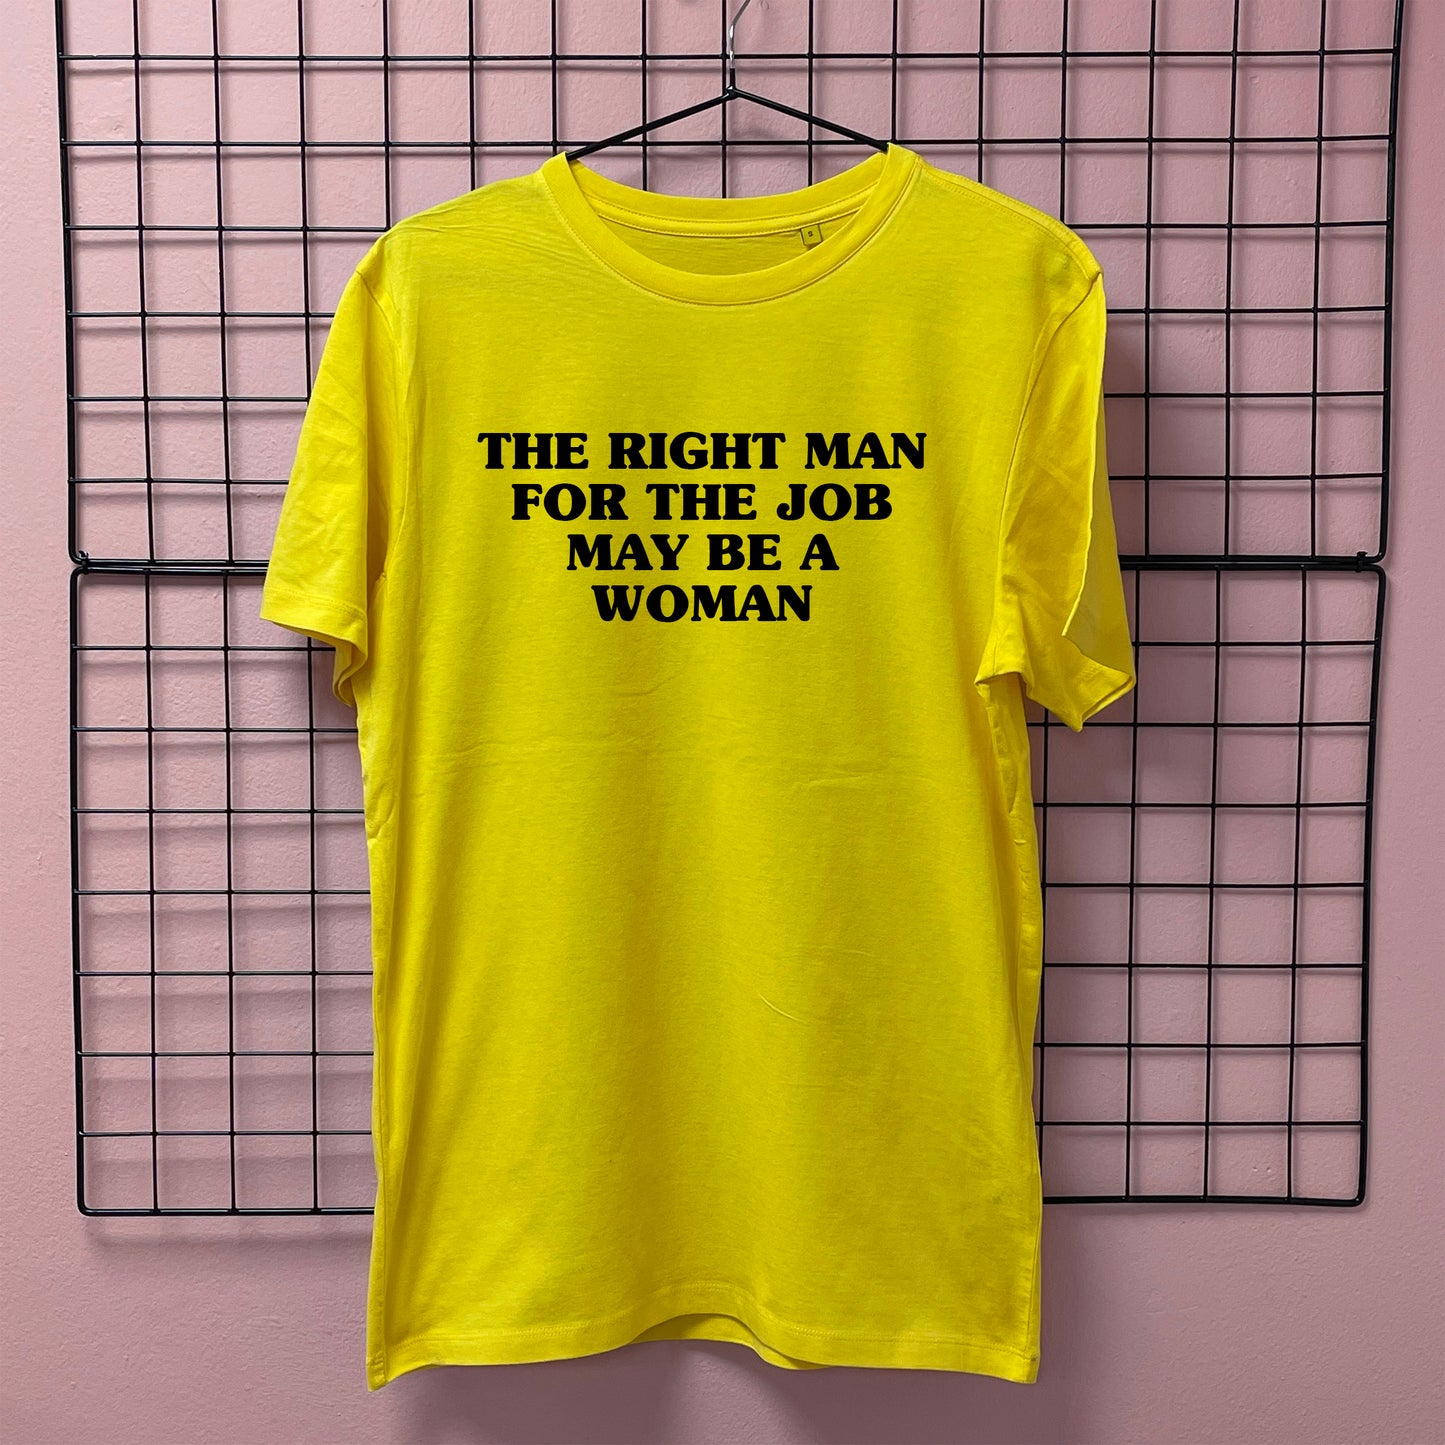 THE RIGHT MAN FOR THE JOB IS A WOMAN T-SHIRT